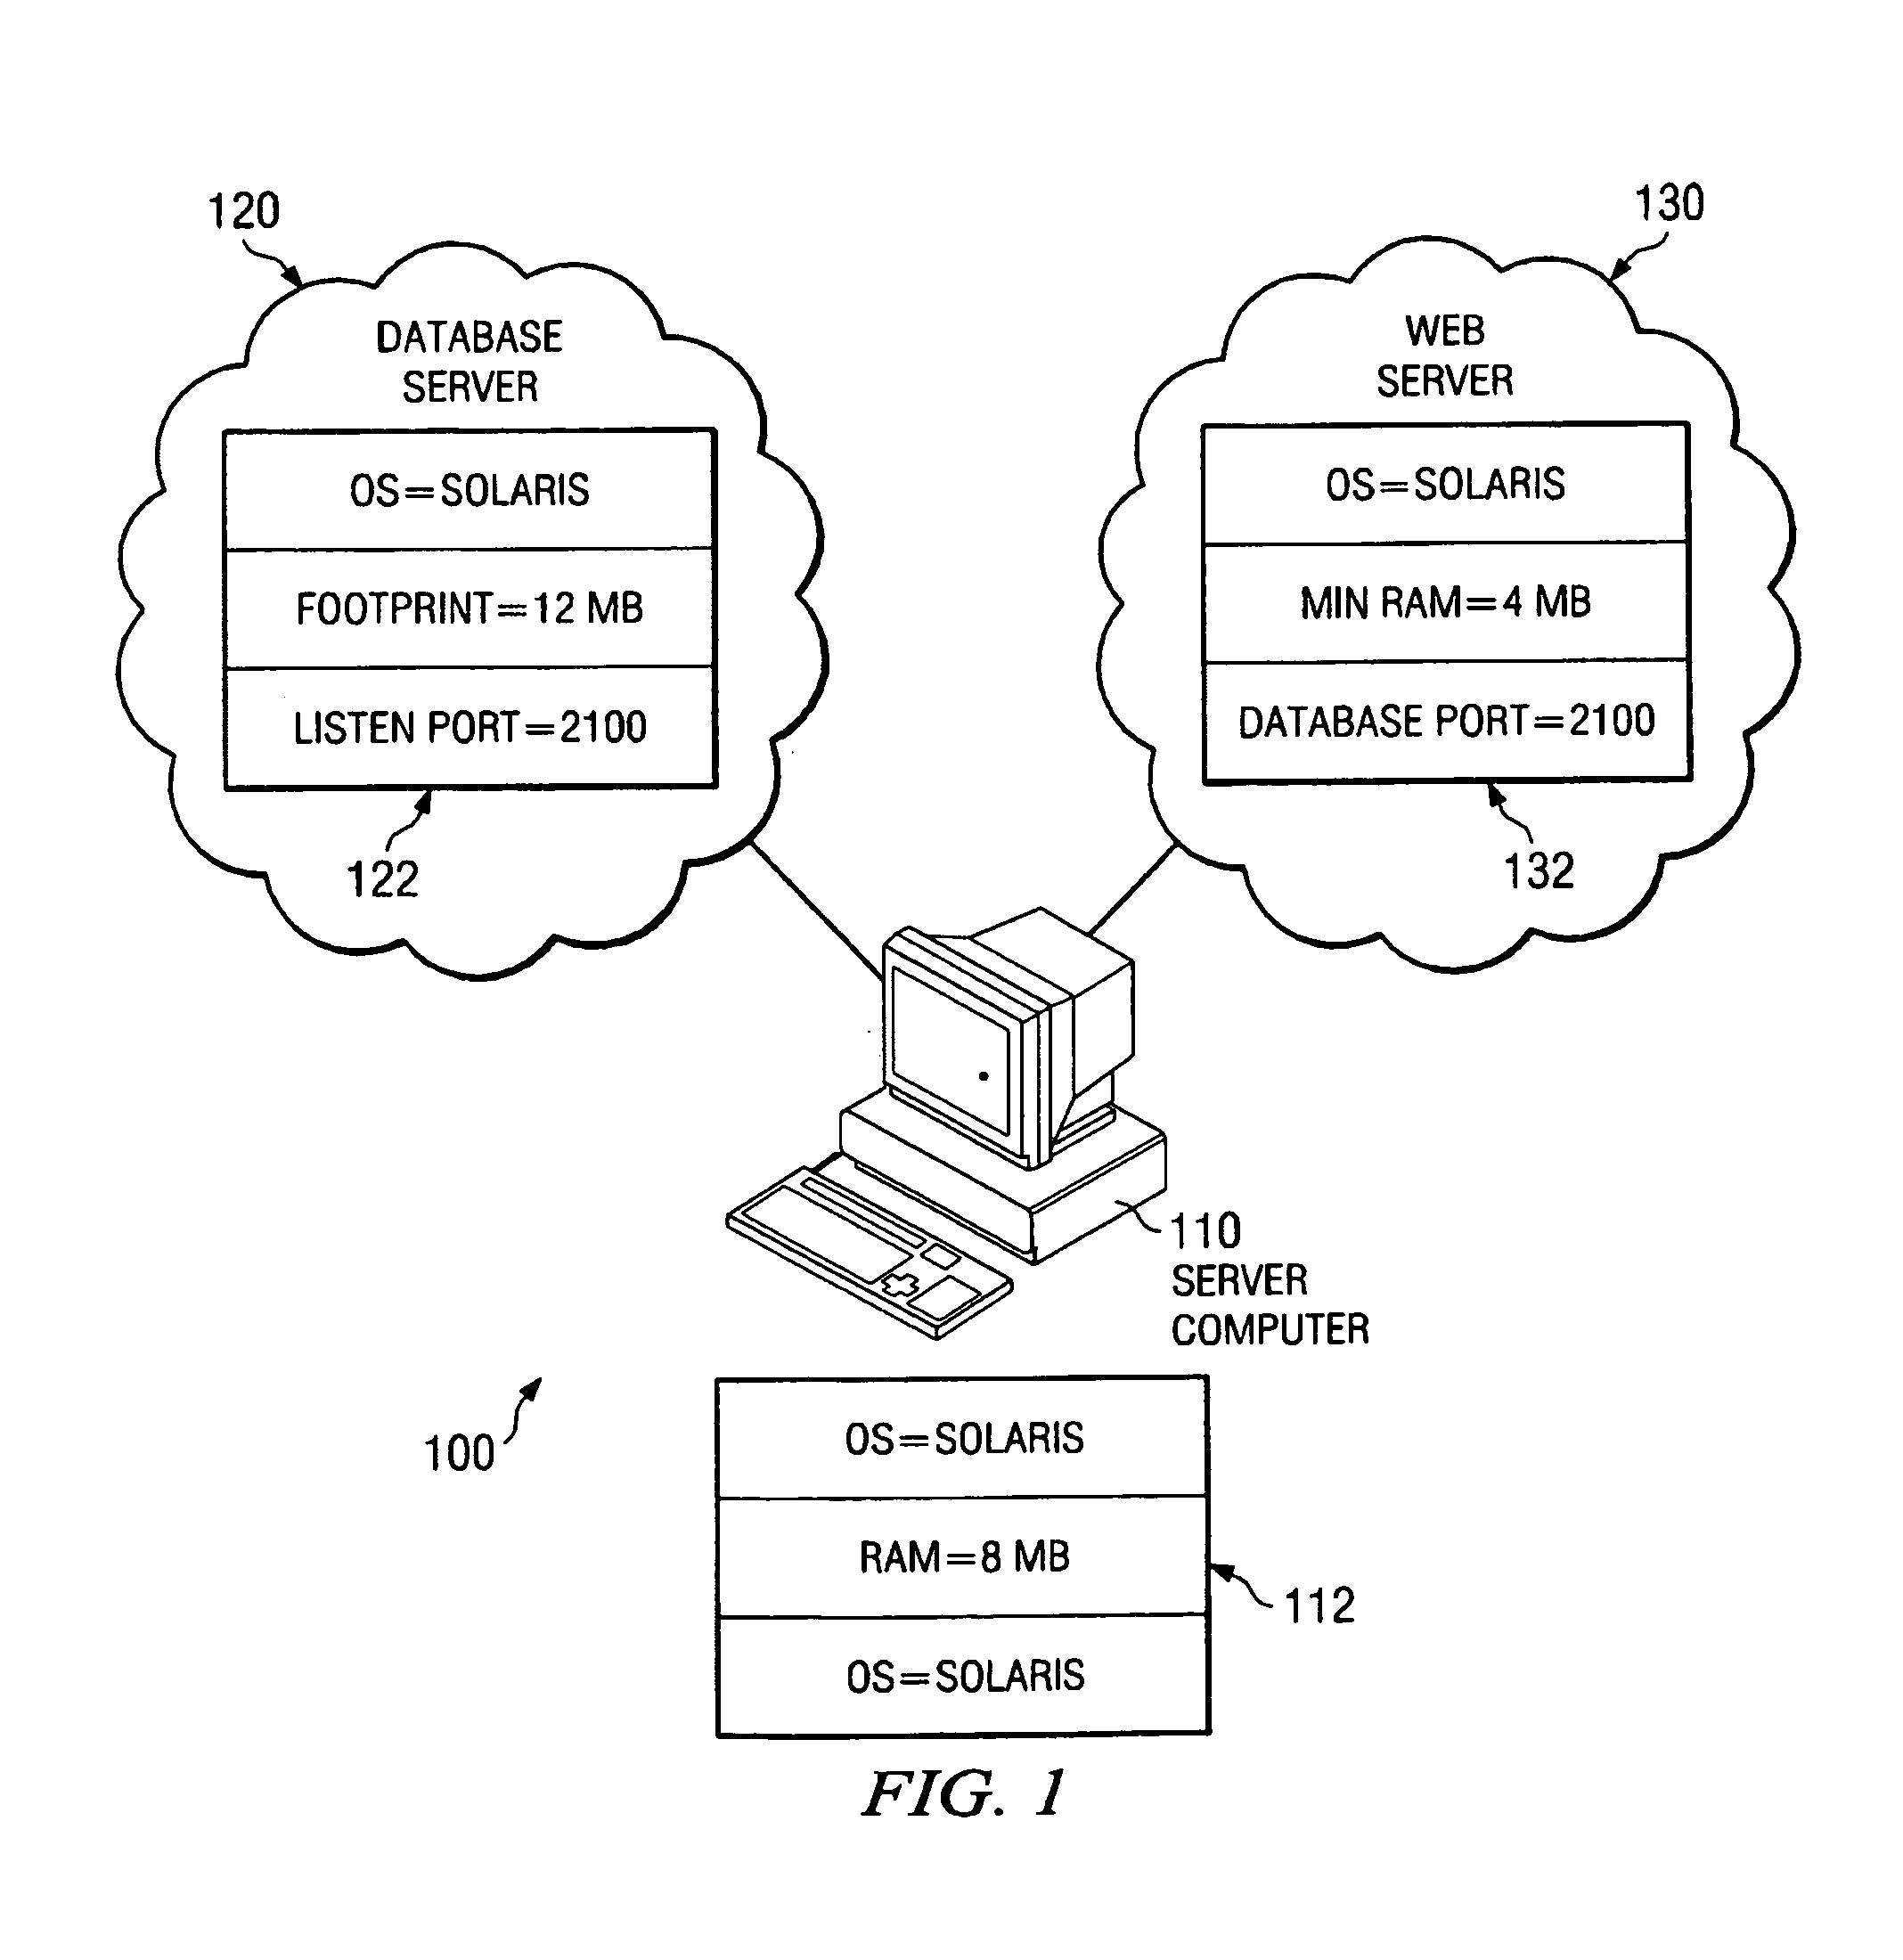 Method and system for querying an applied data model